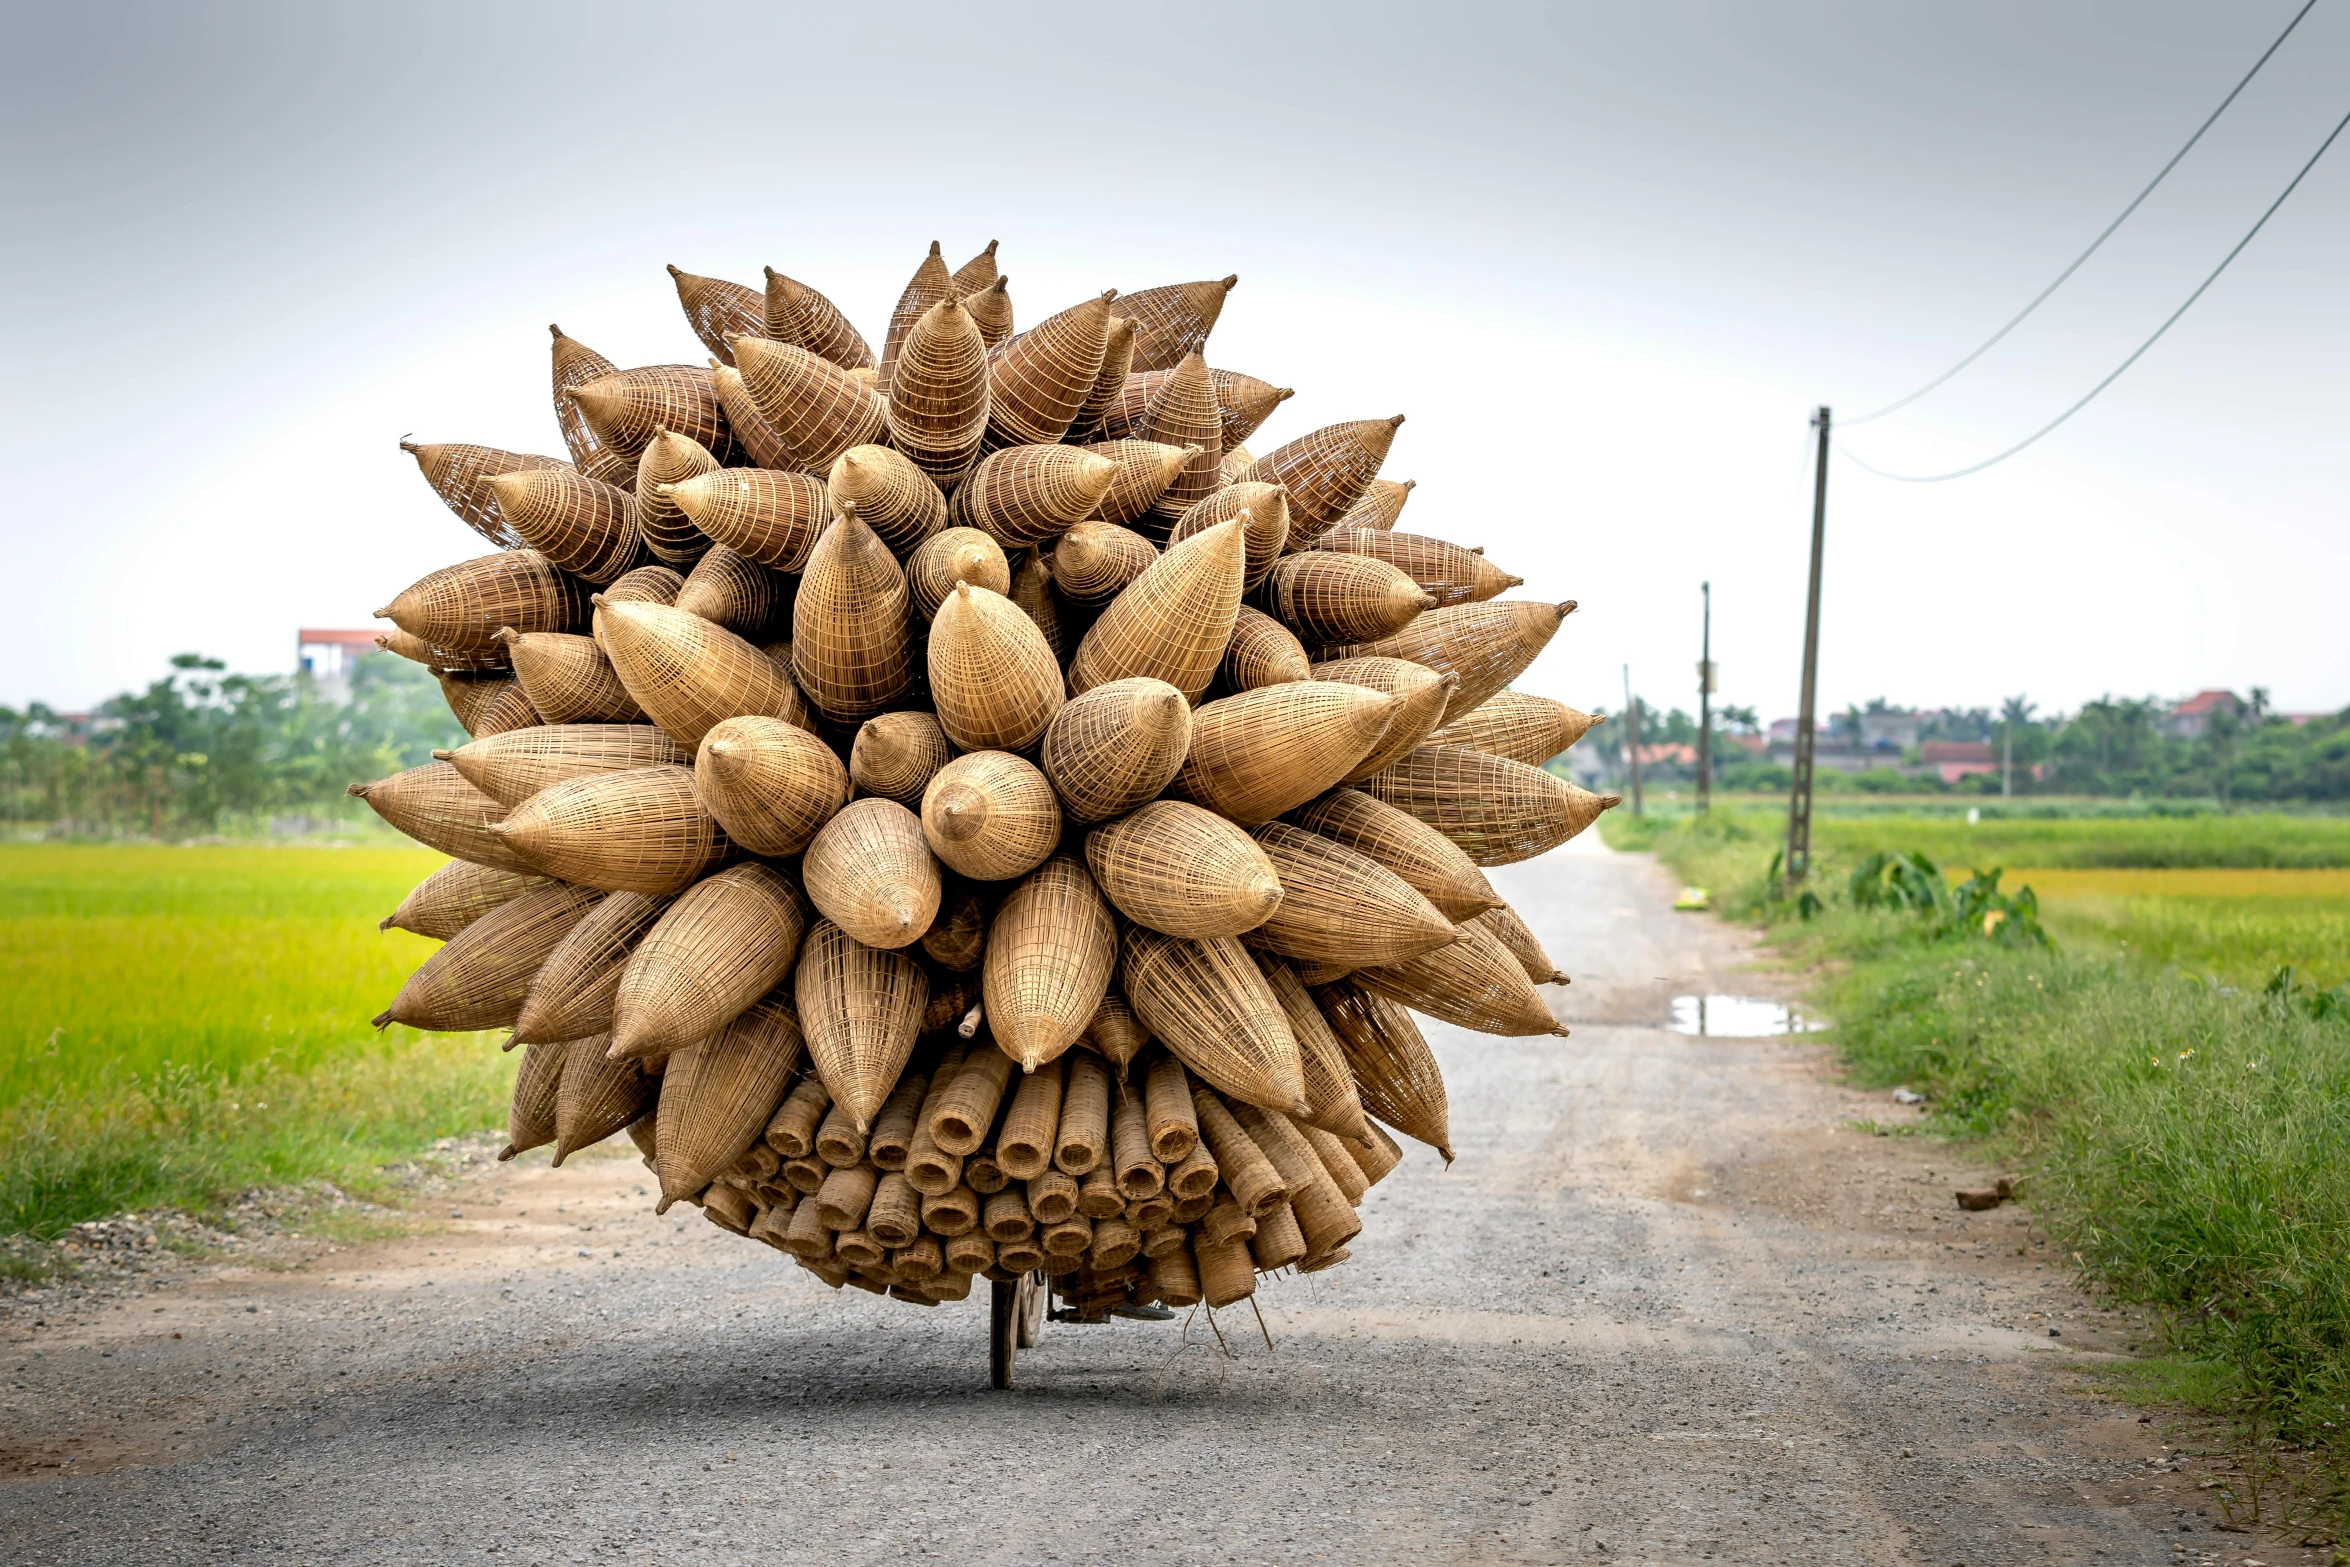 a person riding a bike down a dirt road, an album cover, inspired by Ai Weiwei, pexels contest winner, environmental art, clumps of bananas, sculpture made of wood, big pods, vietnam